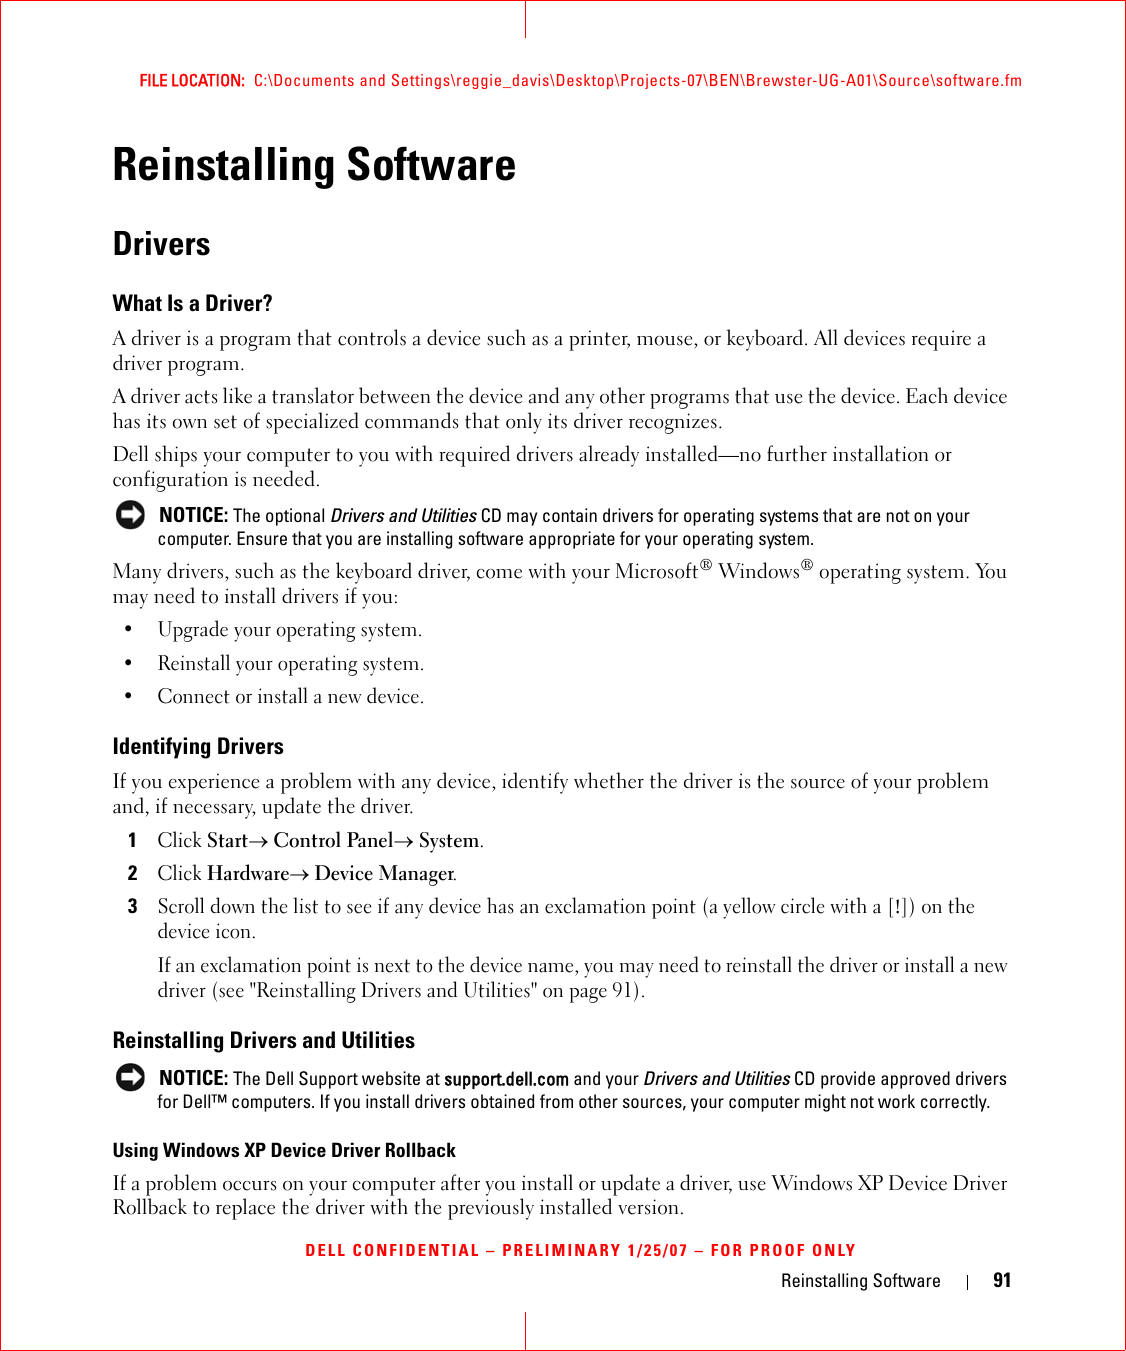 Reinstalling Software 91FILE LOCATION:  C:\Documents and Settings\reggie_davis\Desktop\Projects-07\BEN\Brewster-UG-A01\Source\software.fmDELL CONFIDENTIAL – PRELIMINARY 1/25/07 – FOR PROOF ONLYReinstalling SoftwareDriversWhat Is a Driver?A driver is a program that controls a device such as a printer, mouse, or keyboard. All devices require a driver program.A driver acts like a translator between the device and any other programs that use the device. Each device has its own set of specialized commands that only its driver recognizes.Dell ships your computer to you with required drivers already installed—no further installation or configuration is needed. NOTICE: The optional Drivers and Utilities CD may contain drivers for operating systems that are not on your computer. Ensure that you are installing software appropriate for your operating system.Many drivers, such as the keyboard driver, come with your Microsoft® Windows® operating system. You may need to install drivers if you:• Upgrade your operating system.• Reinstall your operating system.• Connect or install a new device.Identifying DriversIf you experience a problem with any device, identify whether the driver is the source of your problem and, if necessary, update the driver.1Click Start→ Control Panel→ System.2Click Hardware→ Device Manager.3Scroll down the list to see if any device has an exclamation point (a yellow circle with a [!]) on the device icon.If an exclamation point is next to the device name, you may need to reinstall the driver or install a new driver (see &quot;Reinstalling Drivers and Utilities&quot; on page 91).Reinstalling Drivers and Utilities NOTICE: The Dell Support website at support.dell.com and your Drivers and Utilities CD provide approved drivers for Dell™ computers. If you install drivers obtained from other sources, your computer might not work correctly.Using Windows XP Device Driver RollbackIf a problem occurs on your computer after you install or update a driver, use Windows XP Device Driver Rollback to replace the driver with the previously installed version.